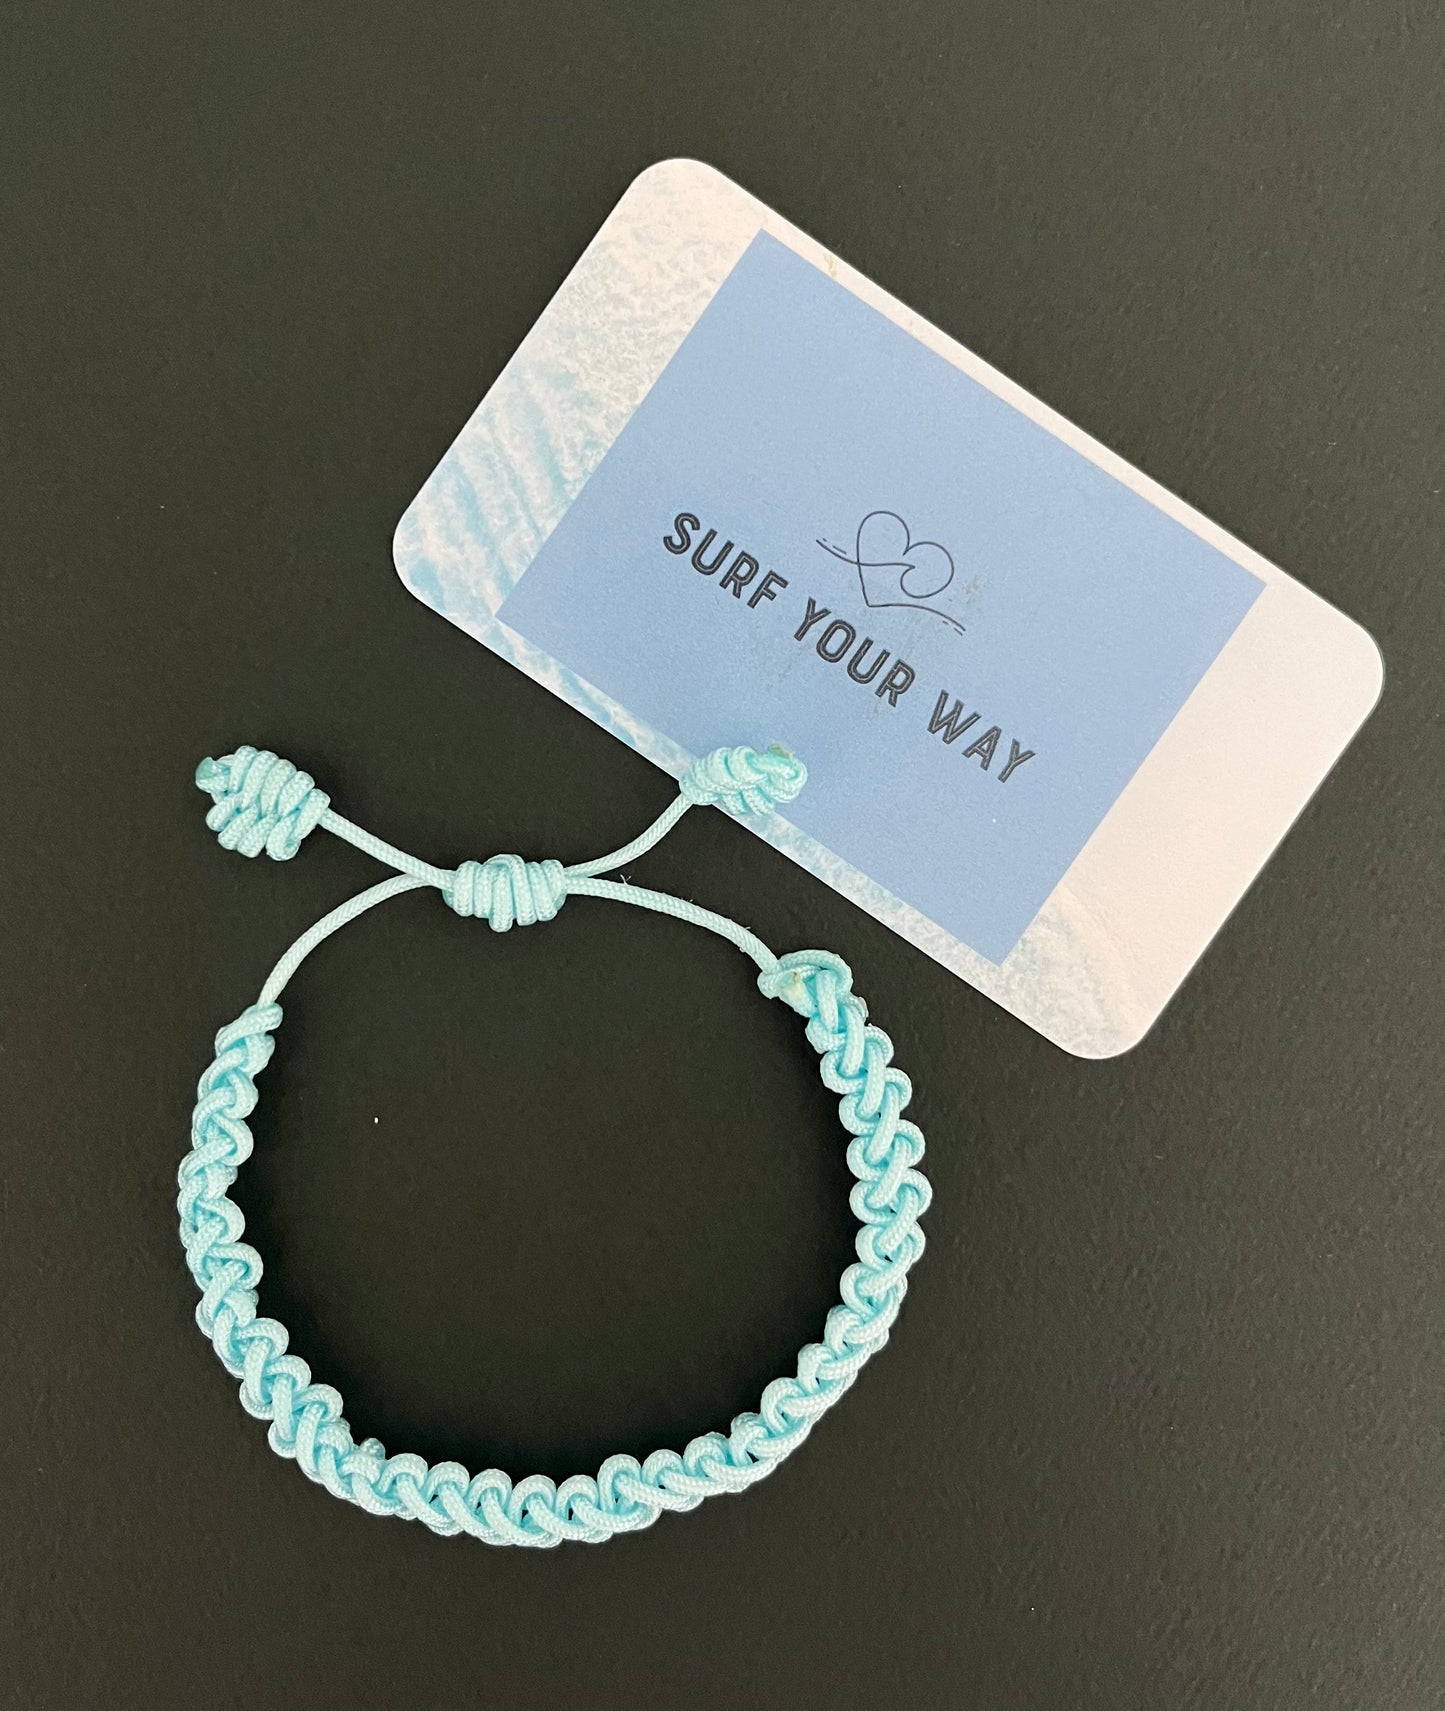 The All Turquoise Tied in Knots Bracelet